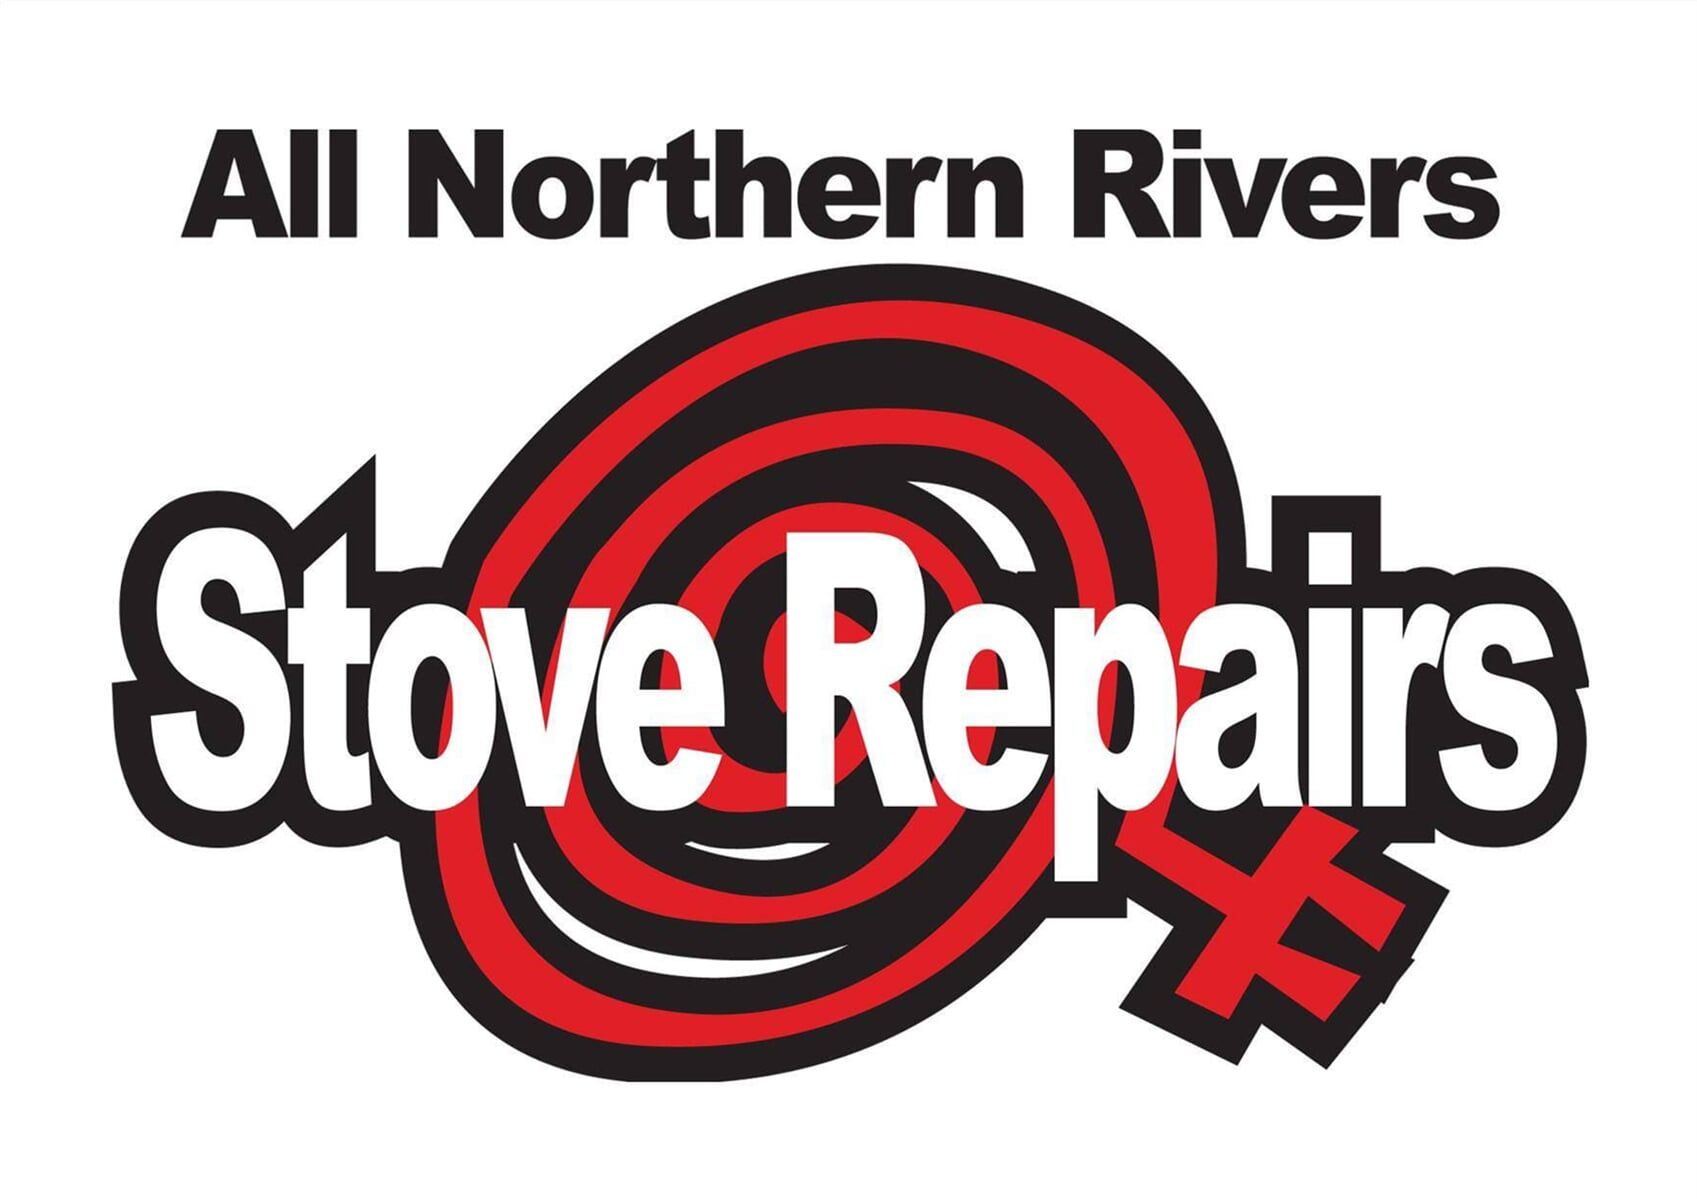 All Northern Rivers Stove Repairs